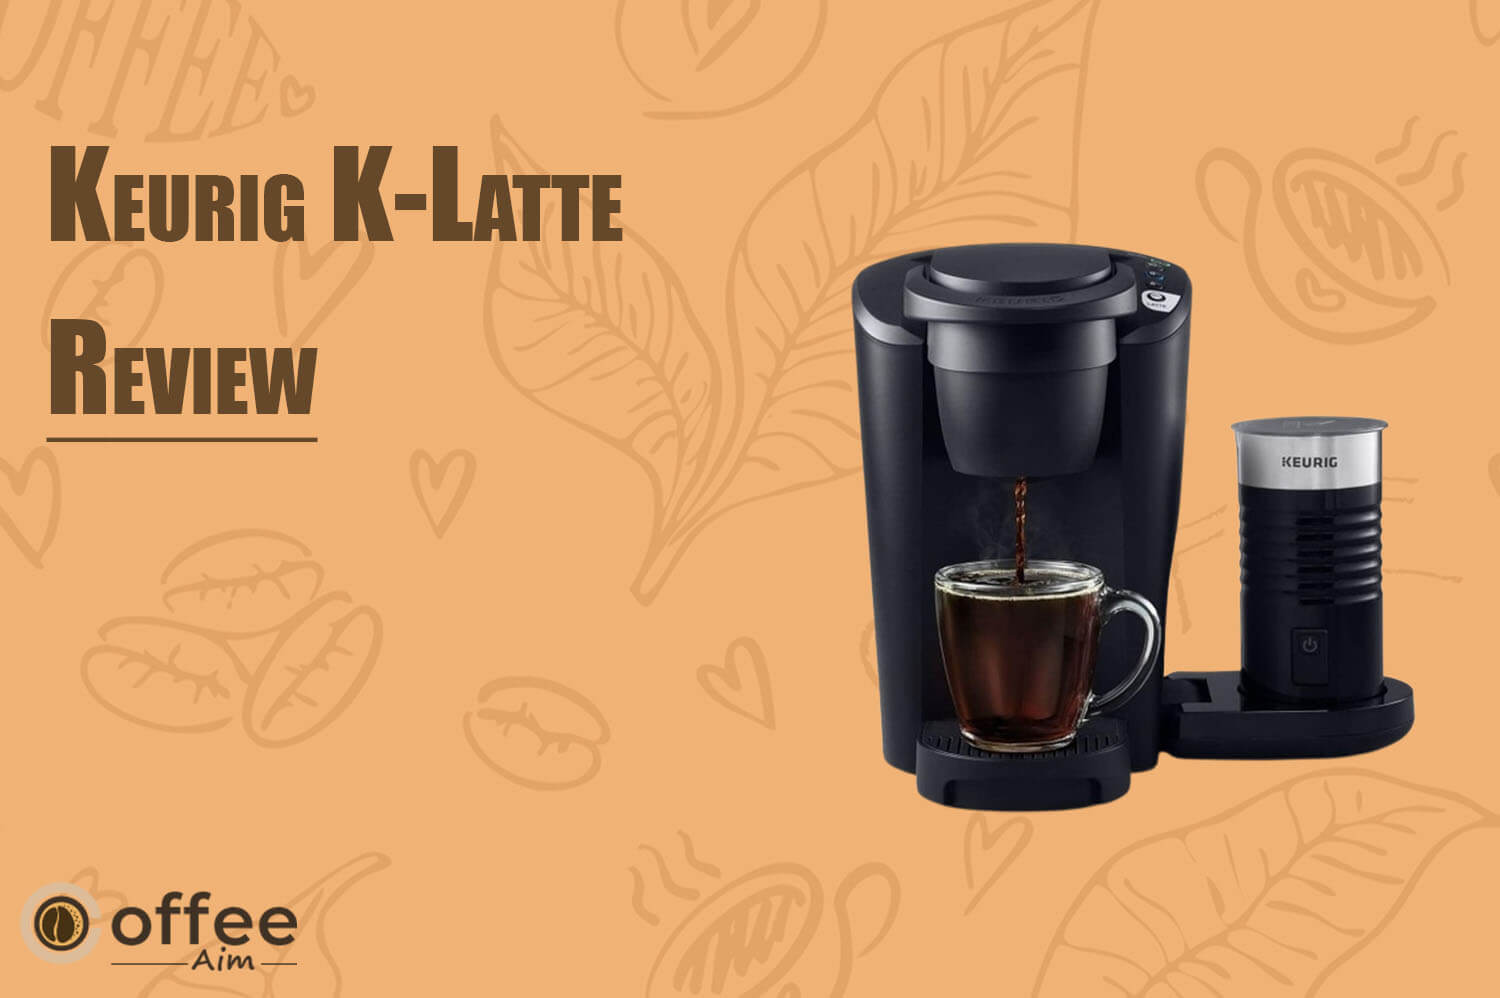 Featured image for the article "Keurig K-Latte Review"